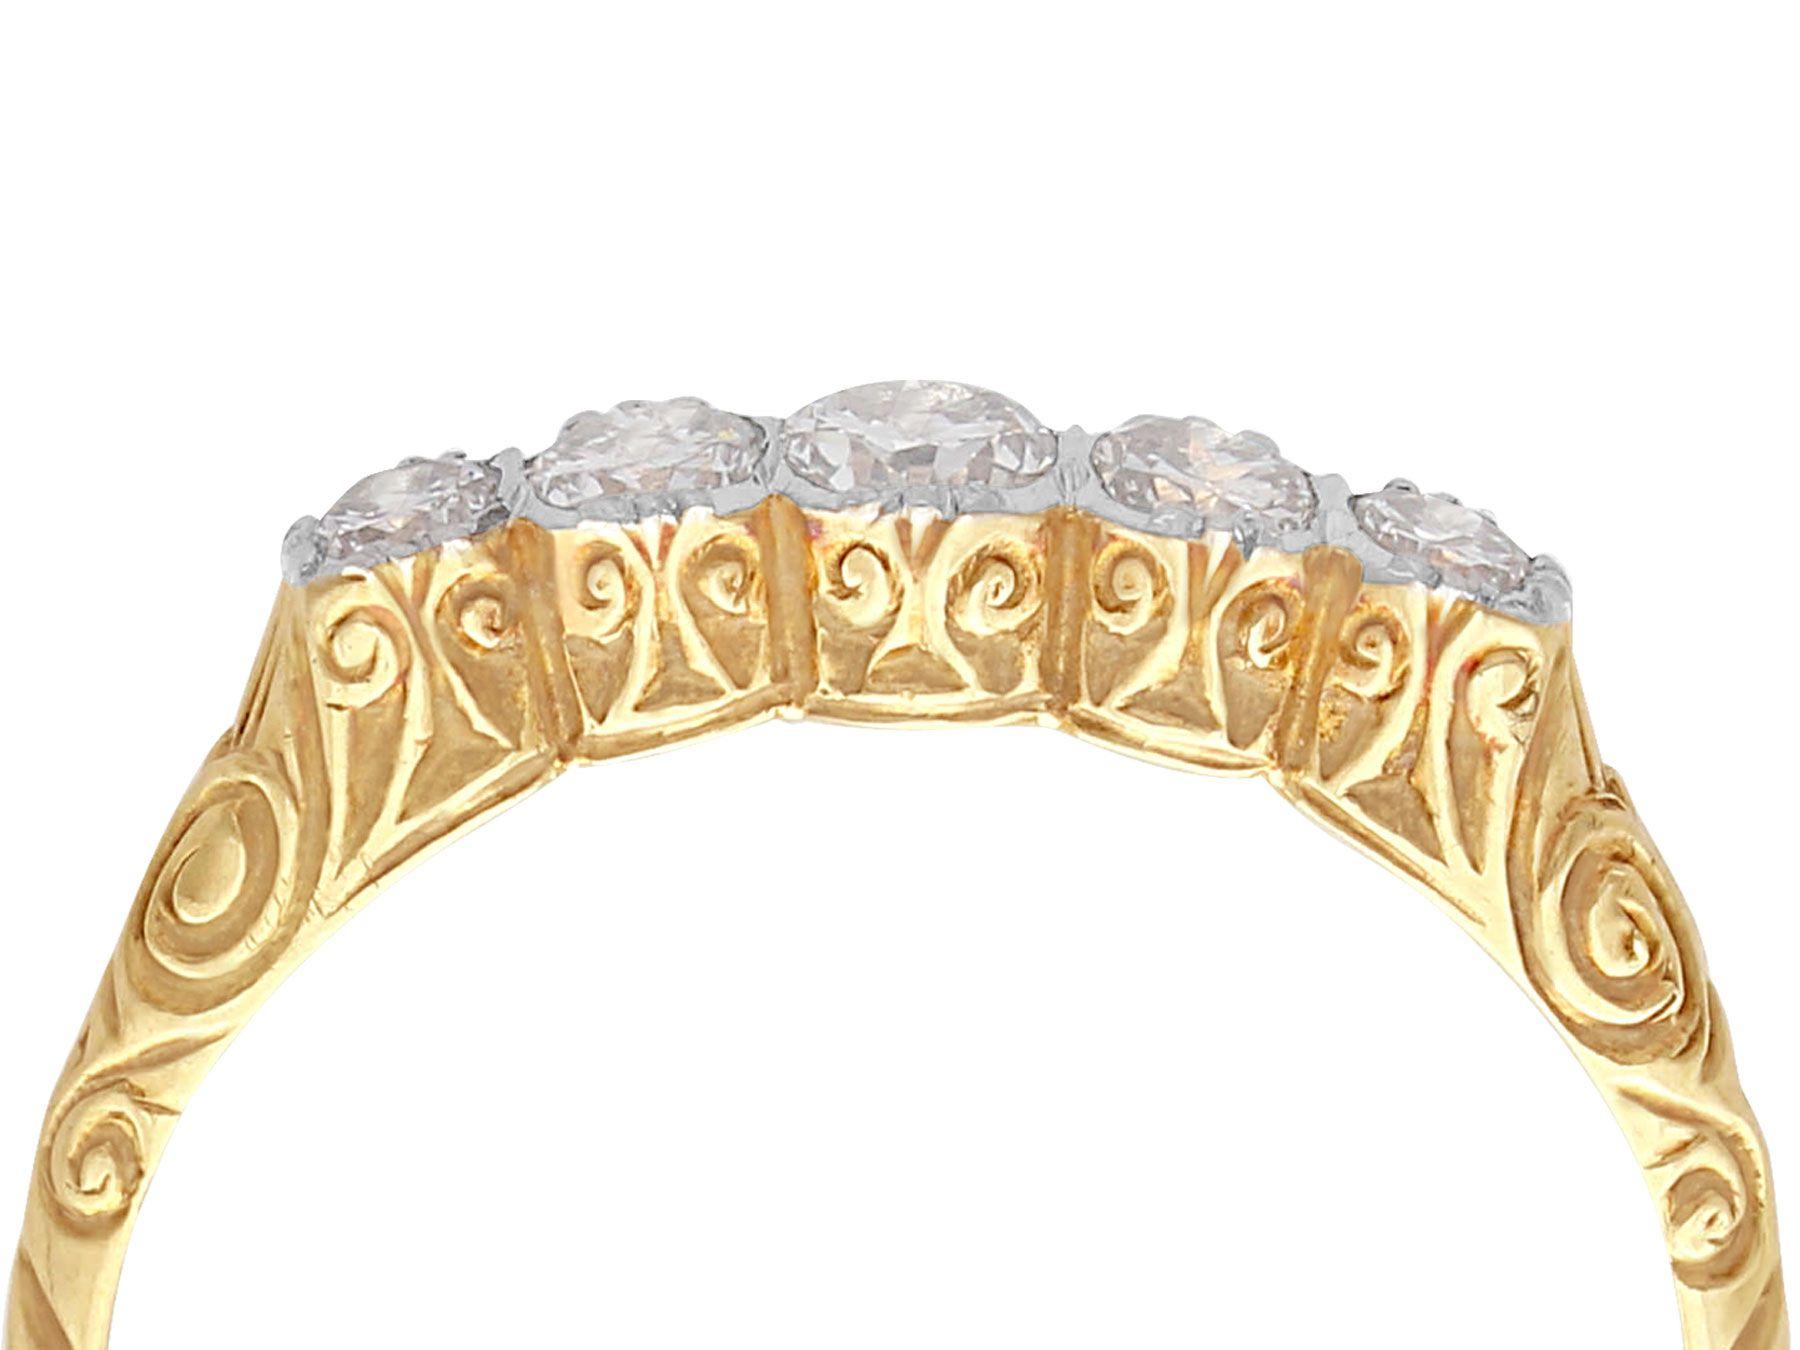 A fine and impressive antique 0.42 carat diamond and 14 karat yellow gold, 14 karat white gold set five stone ring; part of our antique jewelry and estate jewelry collections.

This impressive 1920s band ring has been crafted in 14k yellow gold with